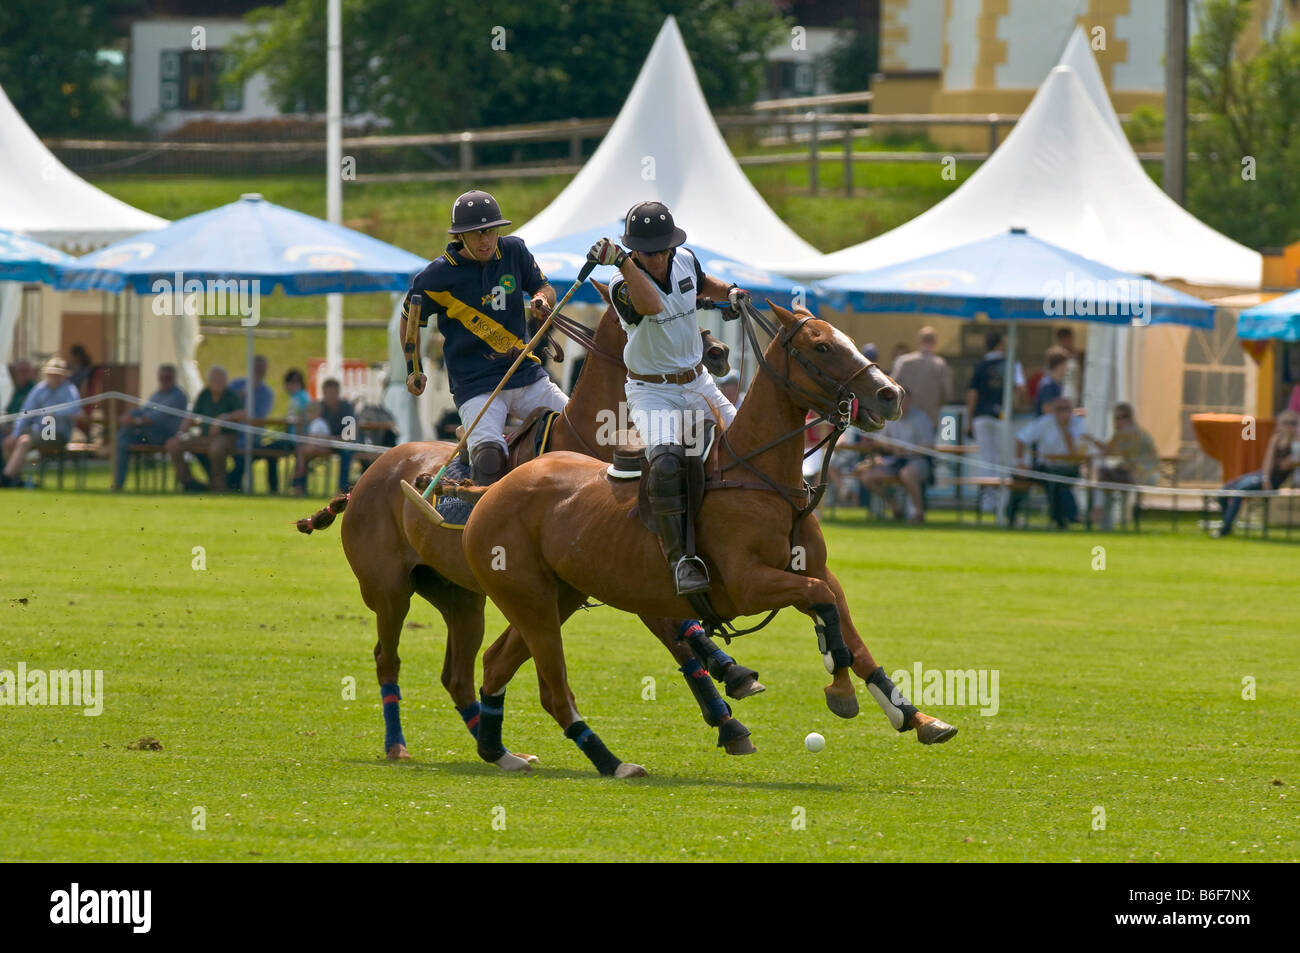 Two polo players jostling for the ball at the Berenberg High Goal Trophy 2008 polo tournament in Thann, Holzkirchen, Bavaria, G Stock Photo